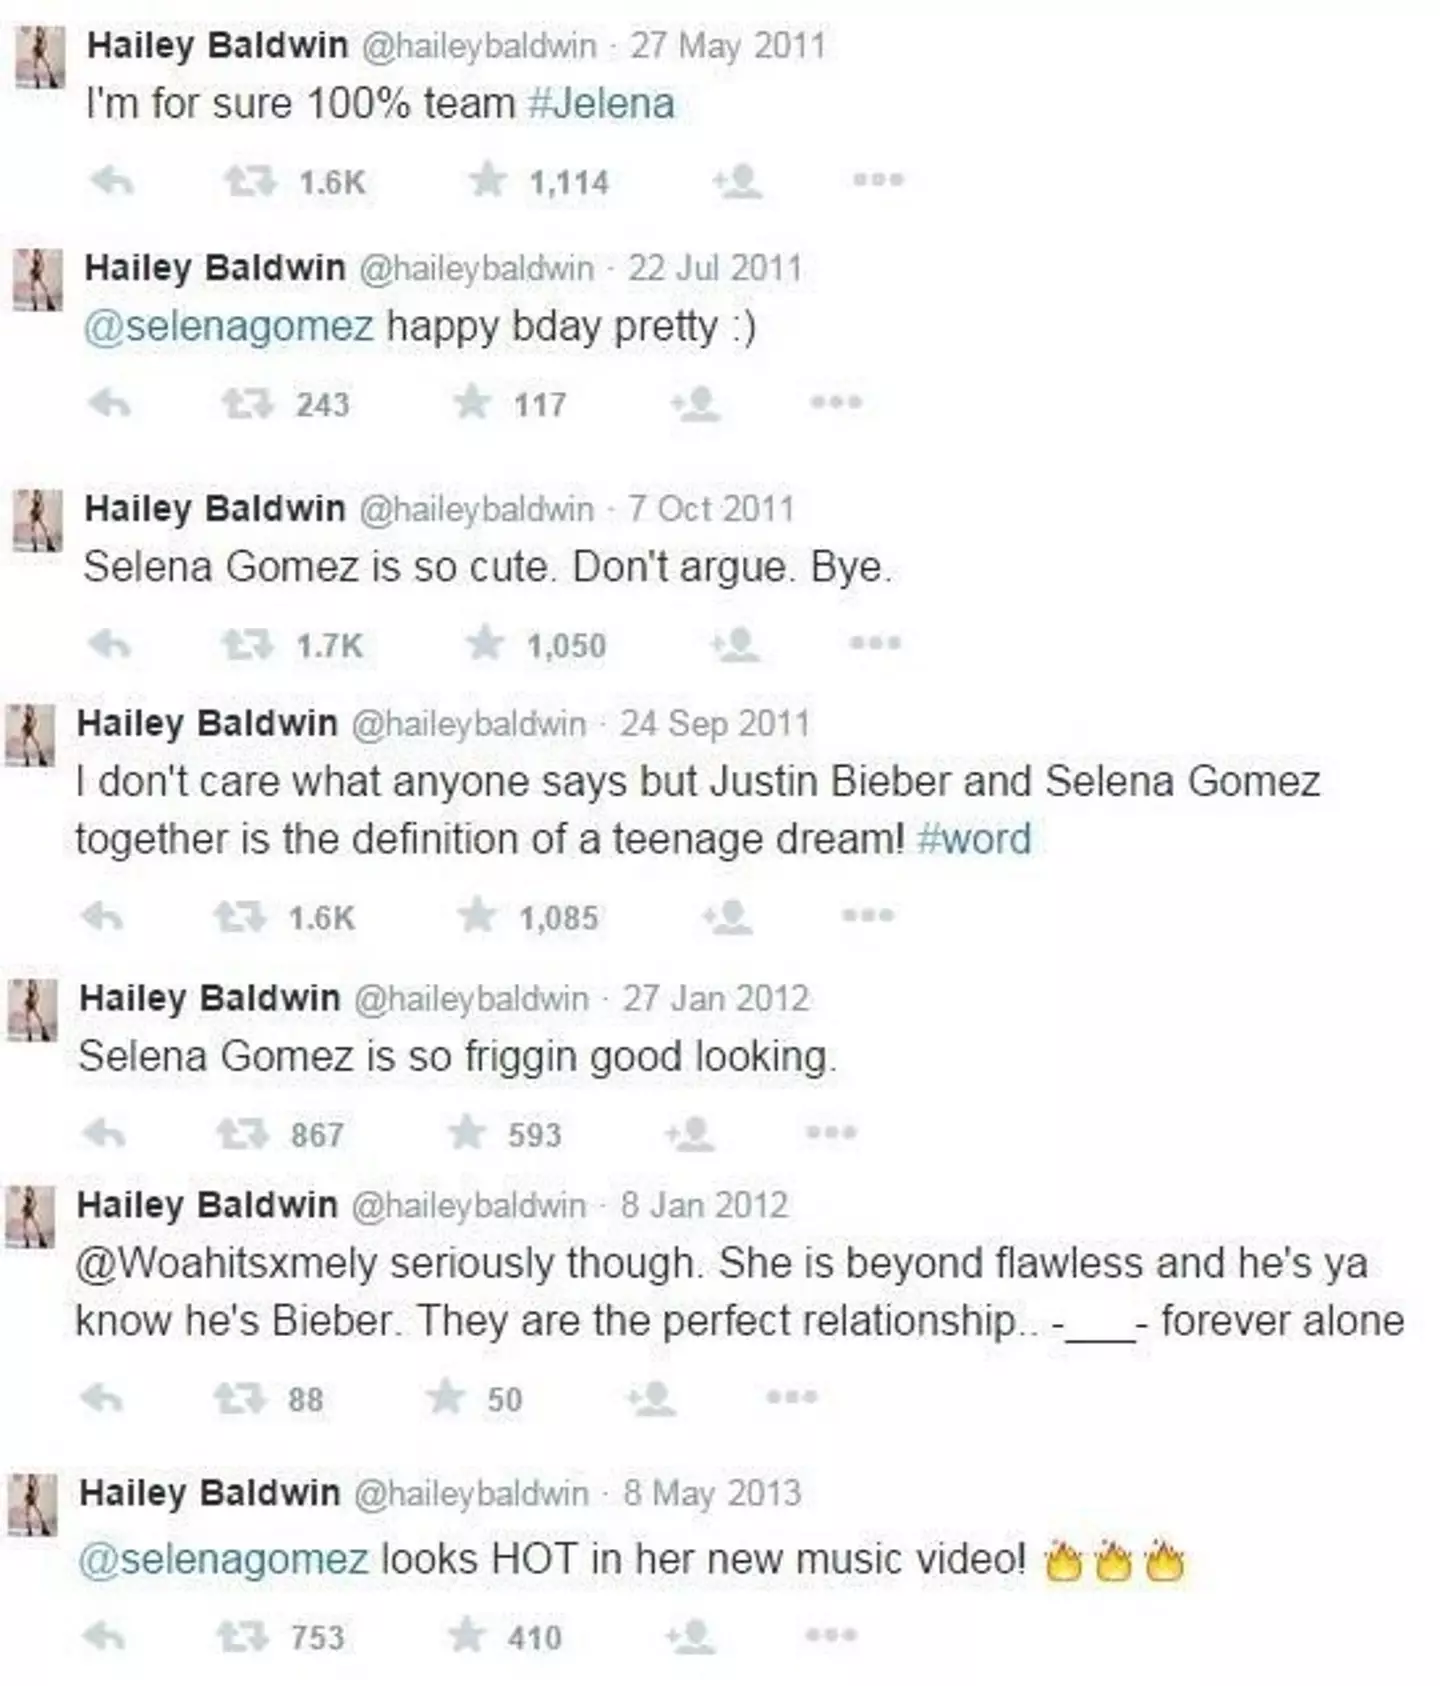 Hailey was clearly a fan of Selena and Justin back in the day.